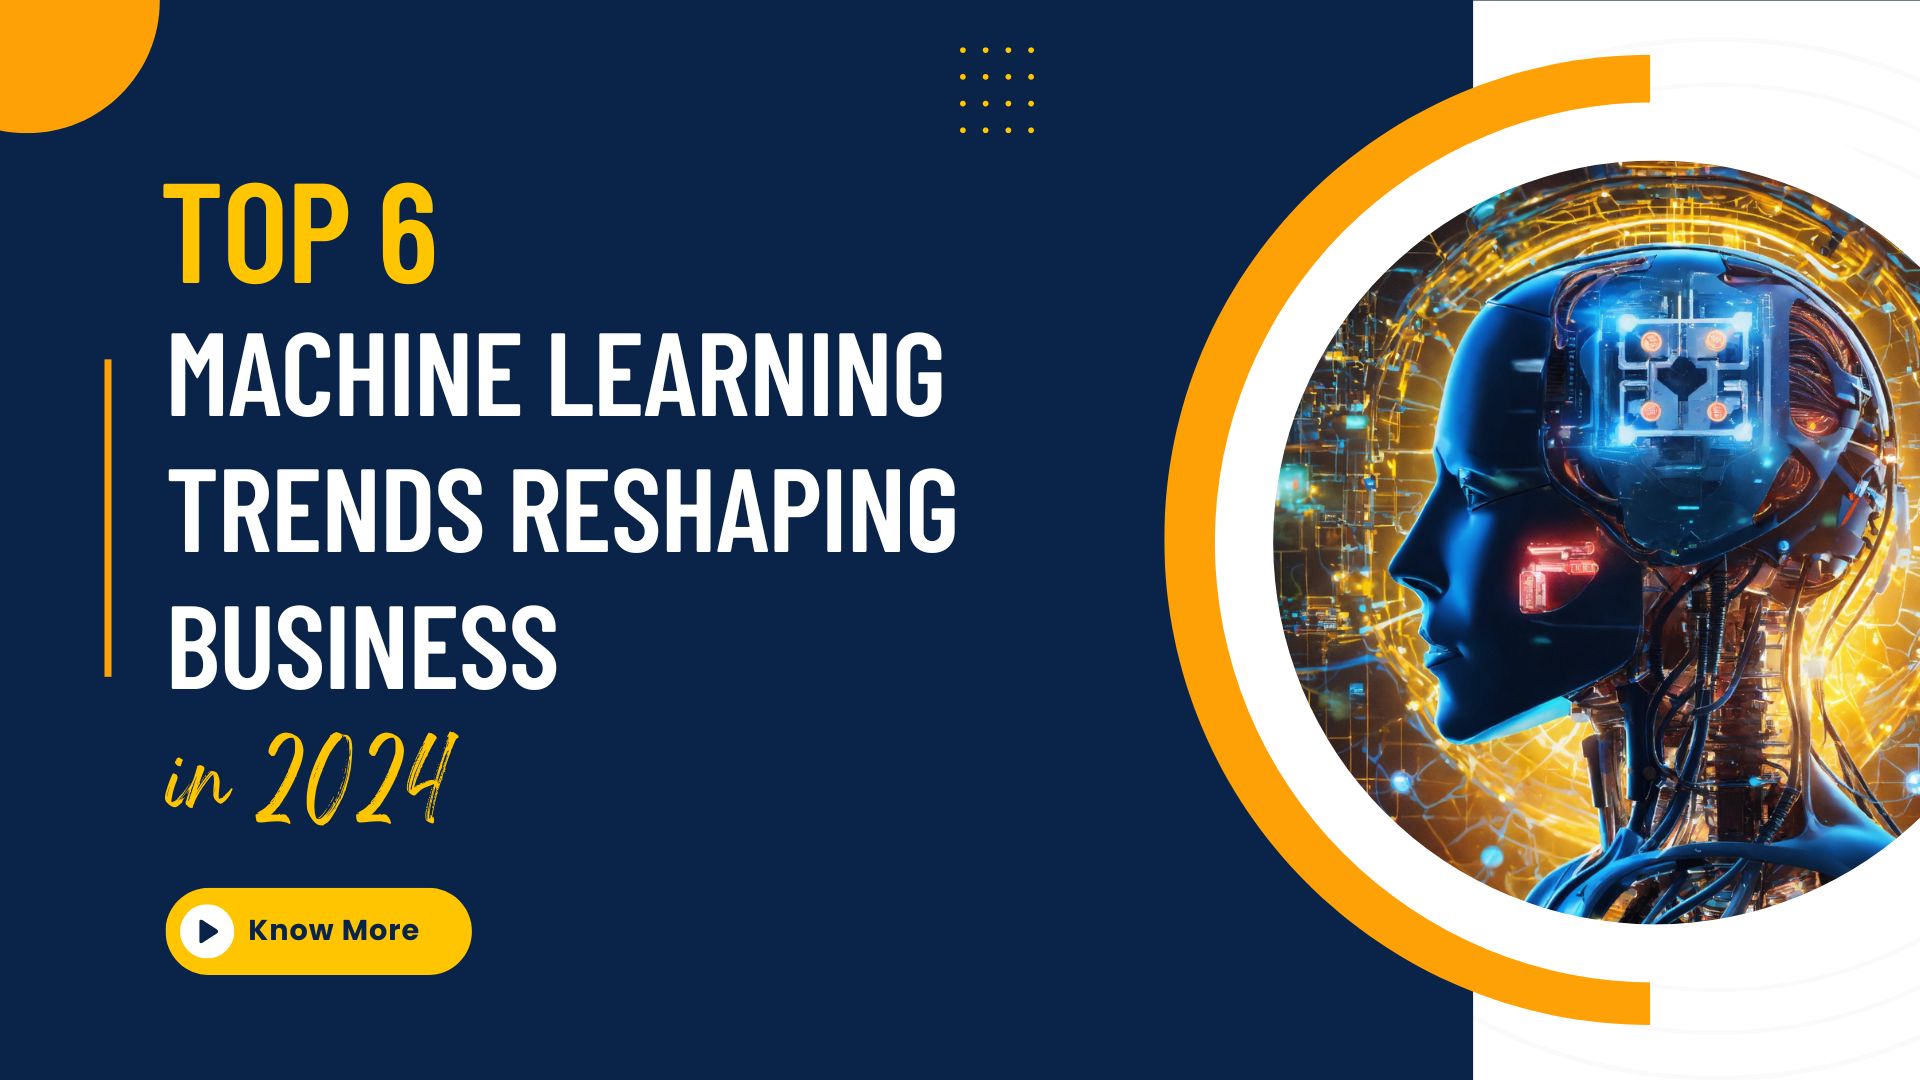 Top 6 Machine Learning Trends Reshaping Business in 2024